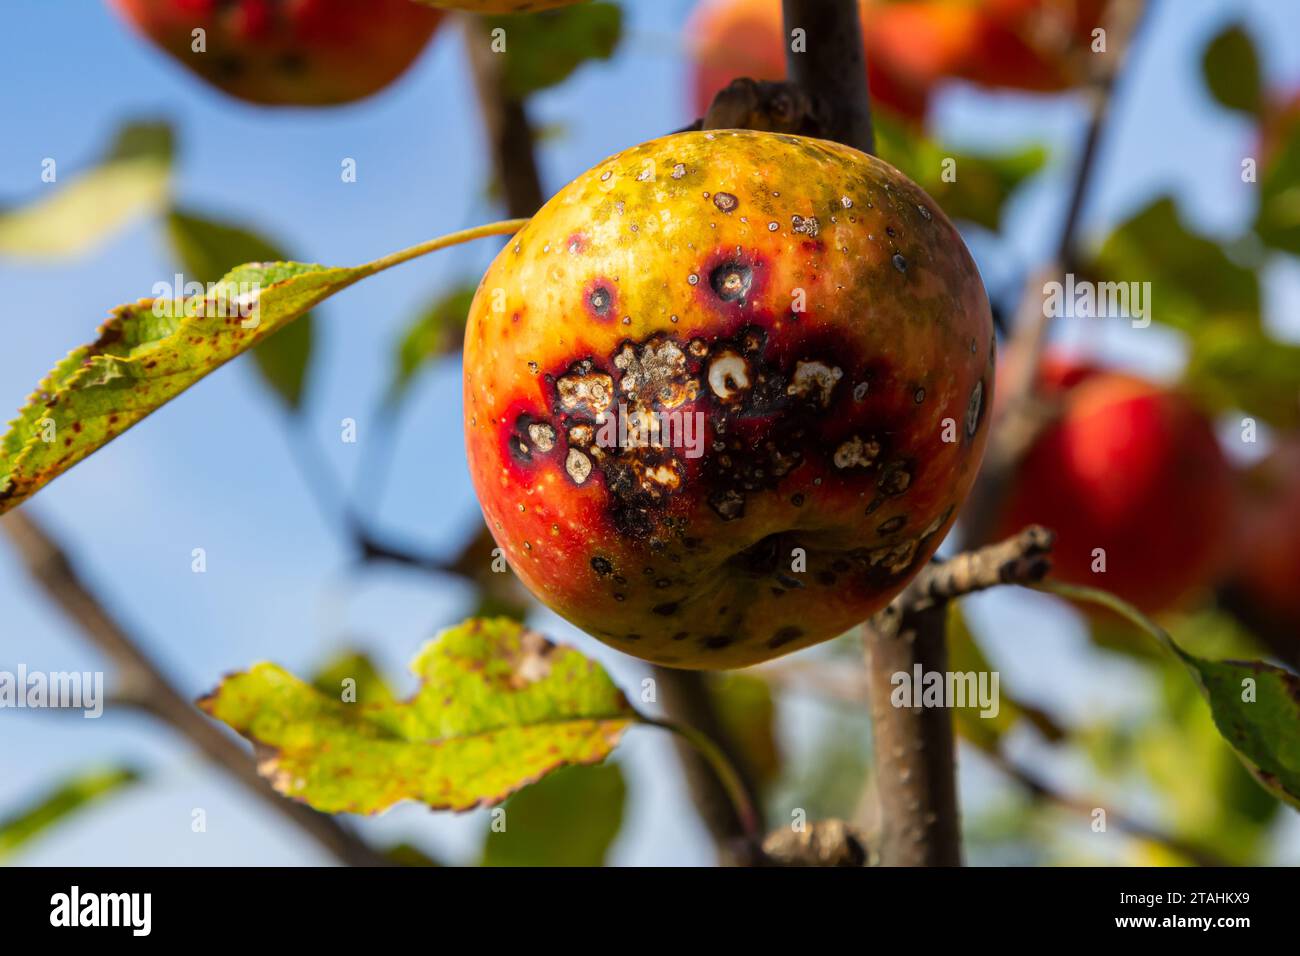 A Stack Of apple scab Diseases and Symptoms with Apple trees. Stock Photo